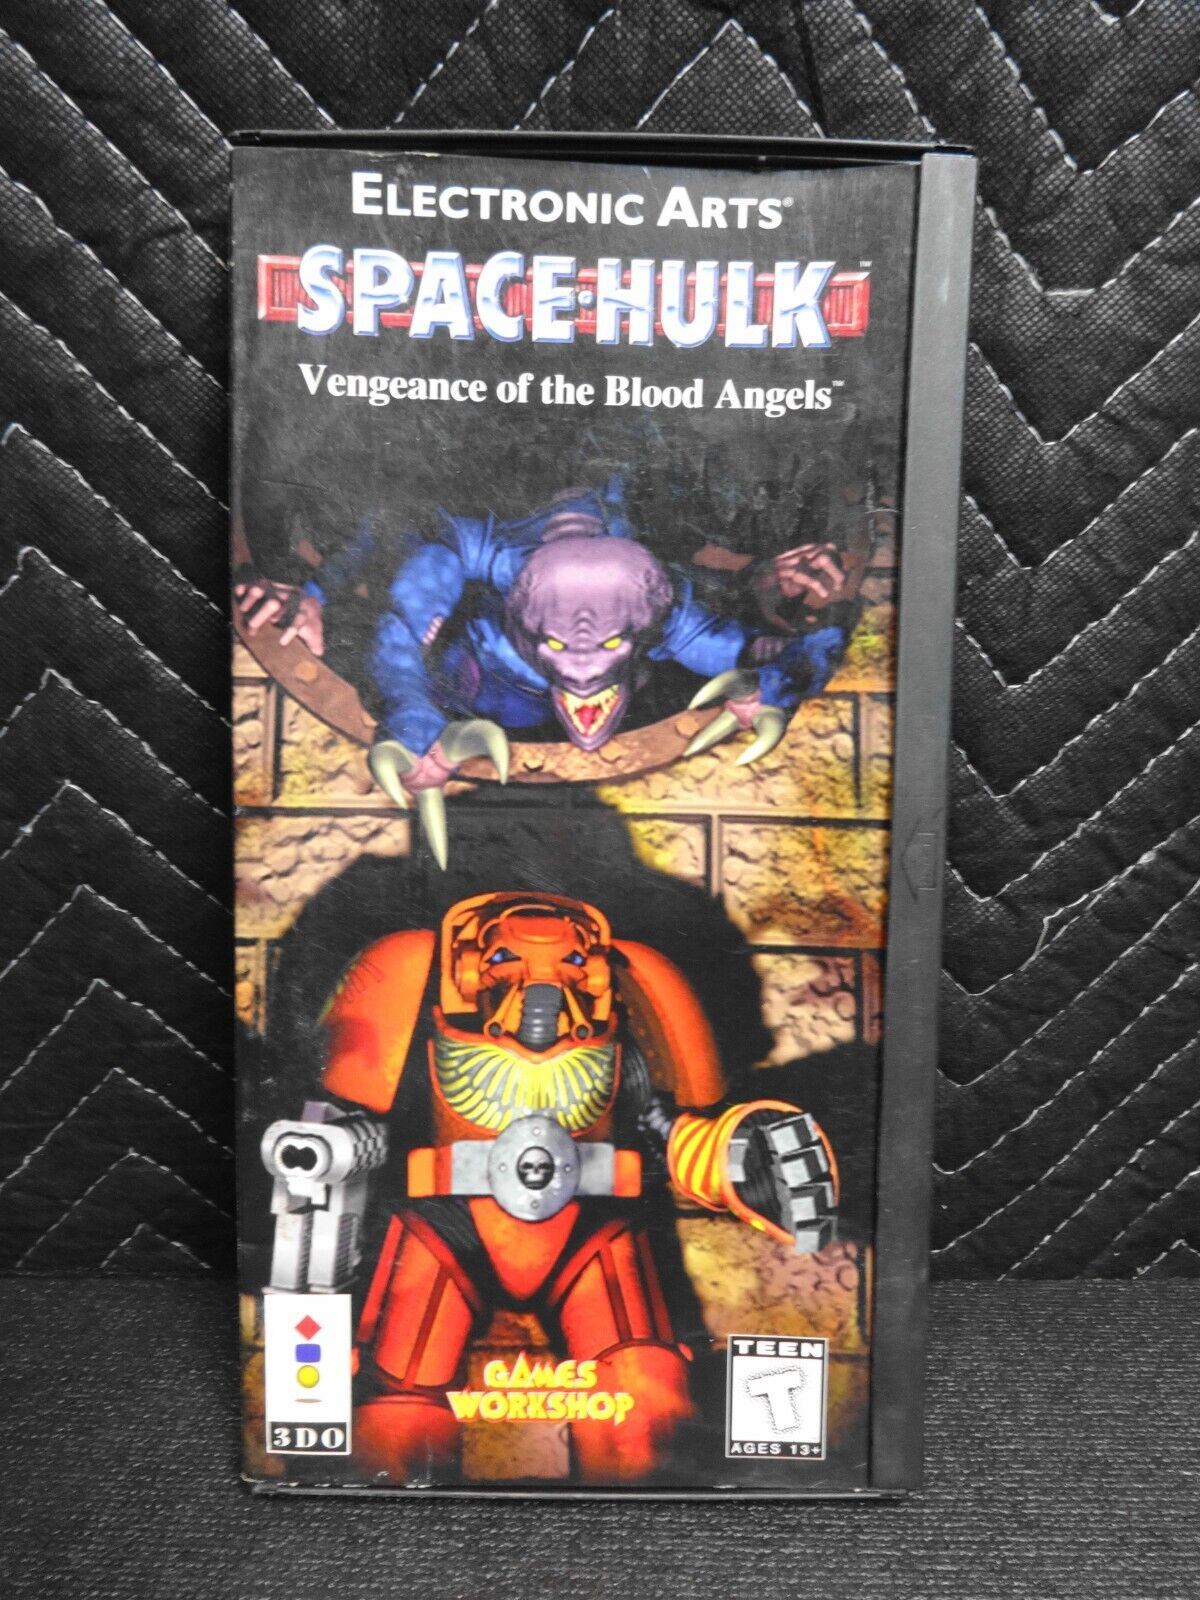 Space Hulk: Vengeance of the Blood Angels (3DO, 1995) in Long Box